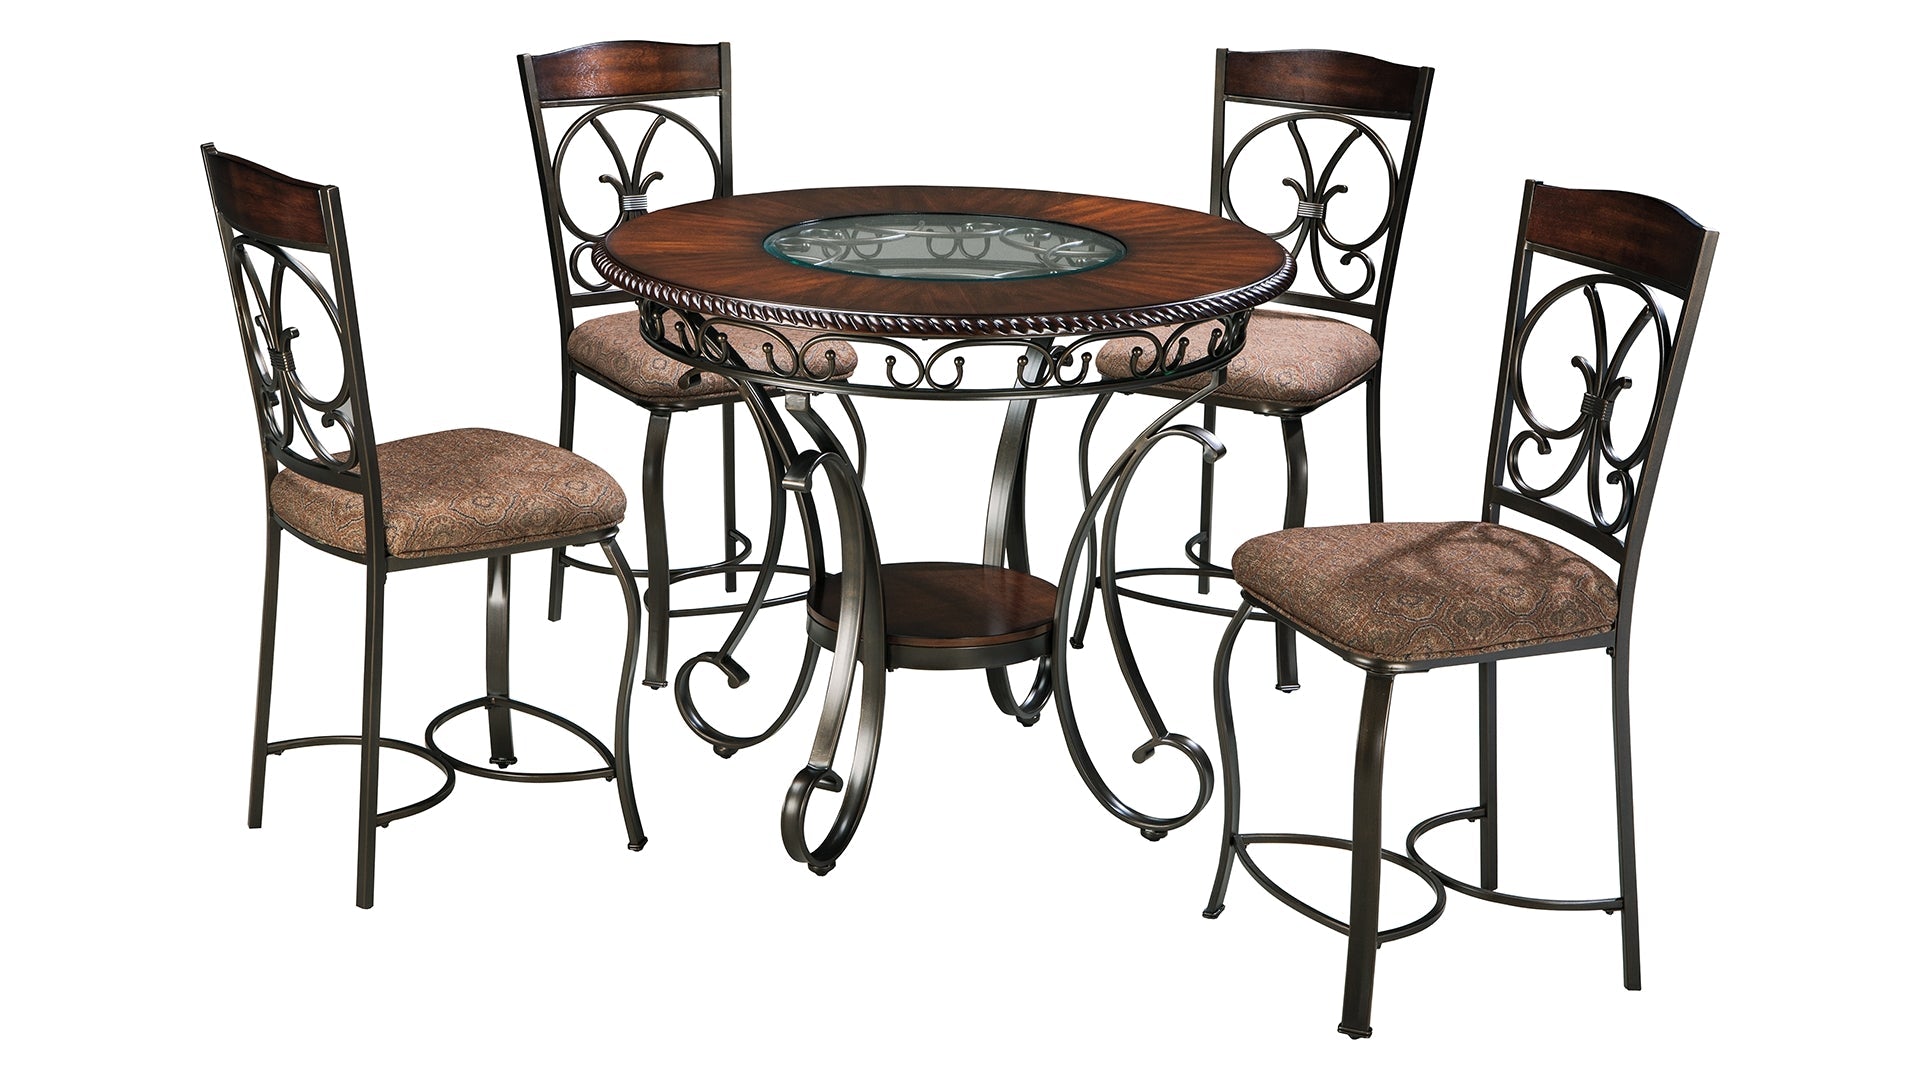 Glambrey Counter Height Dining Table and 4 Barstools